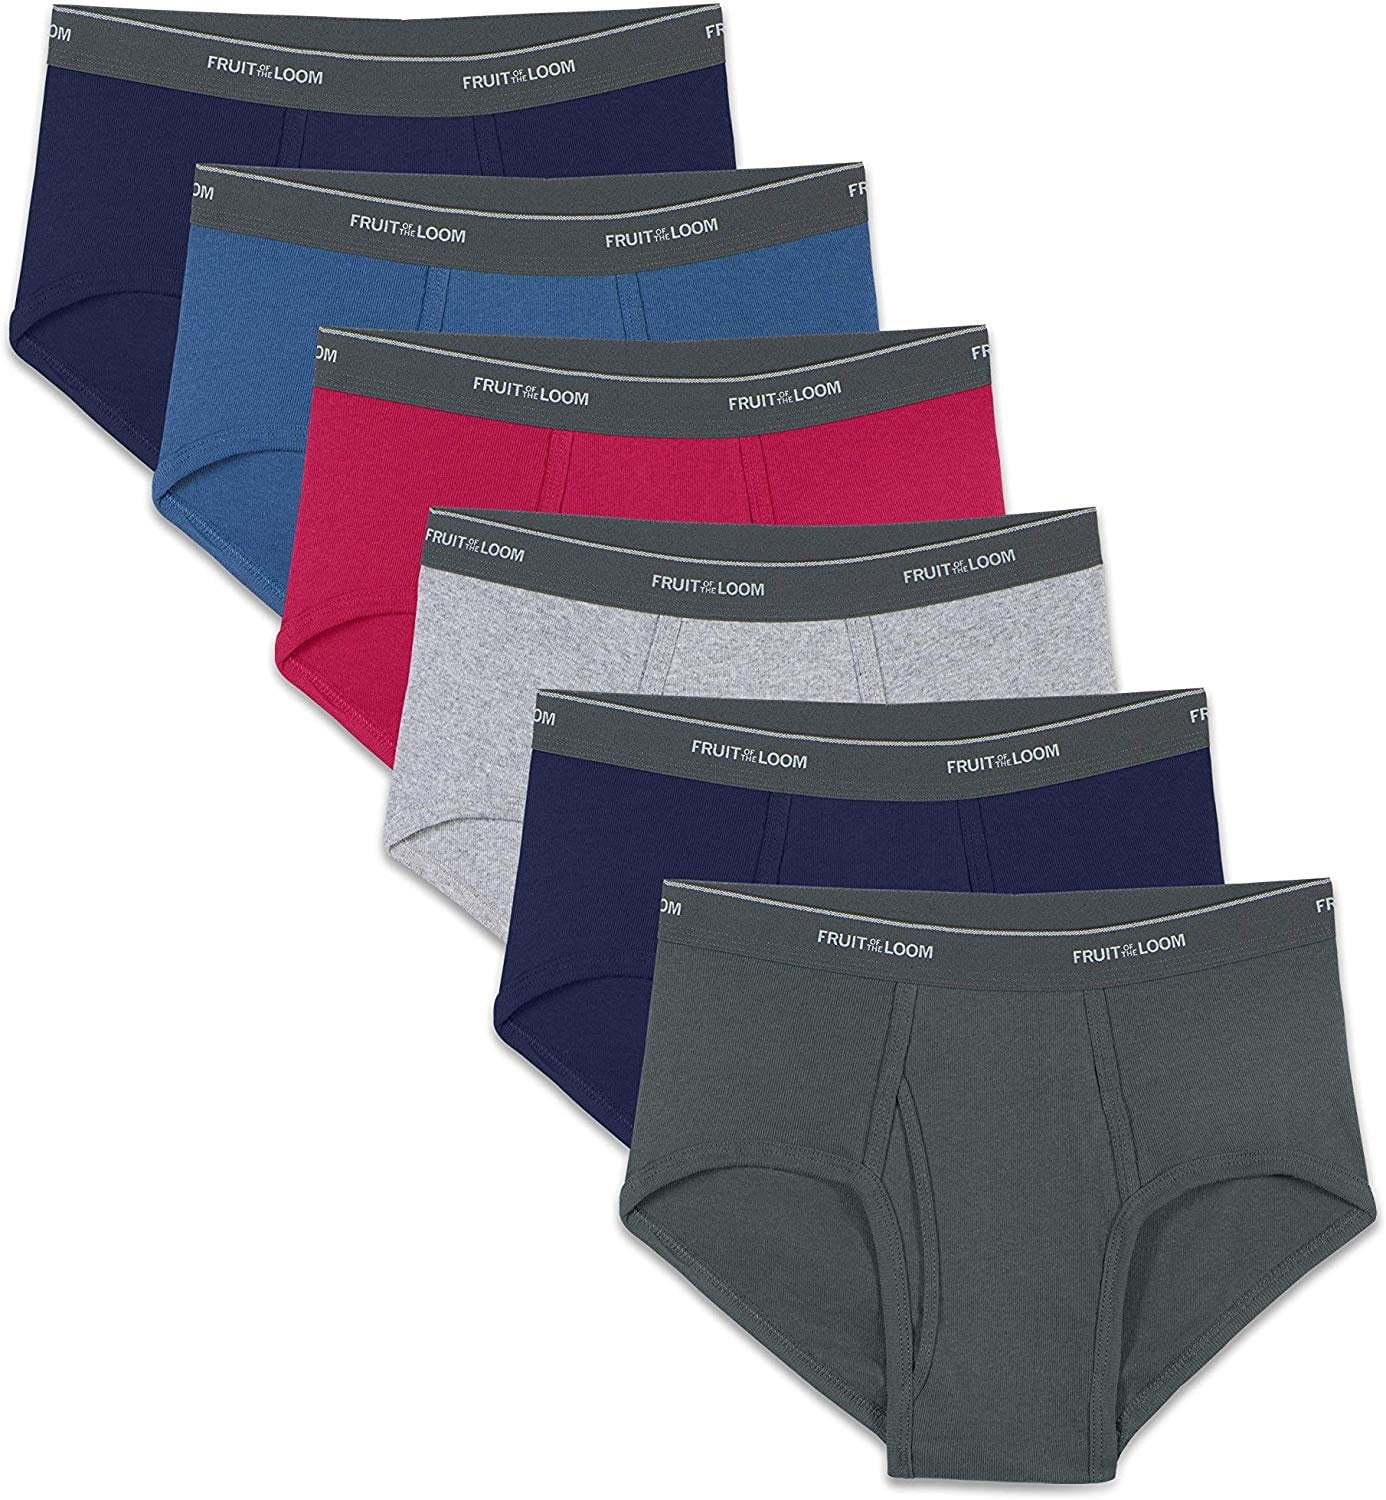 Fruit of the Loom Men's Fashion Brief Pack of 6, Solids, Medium ...